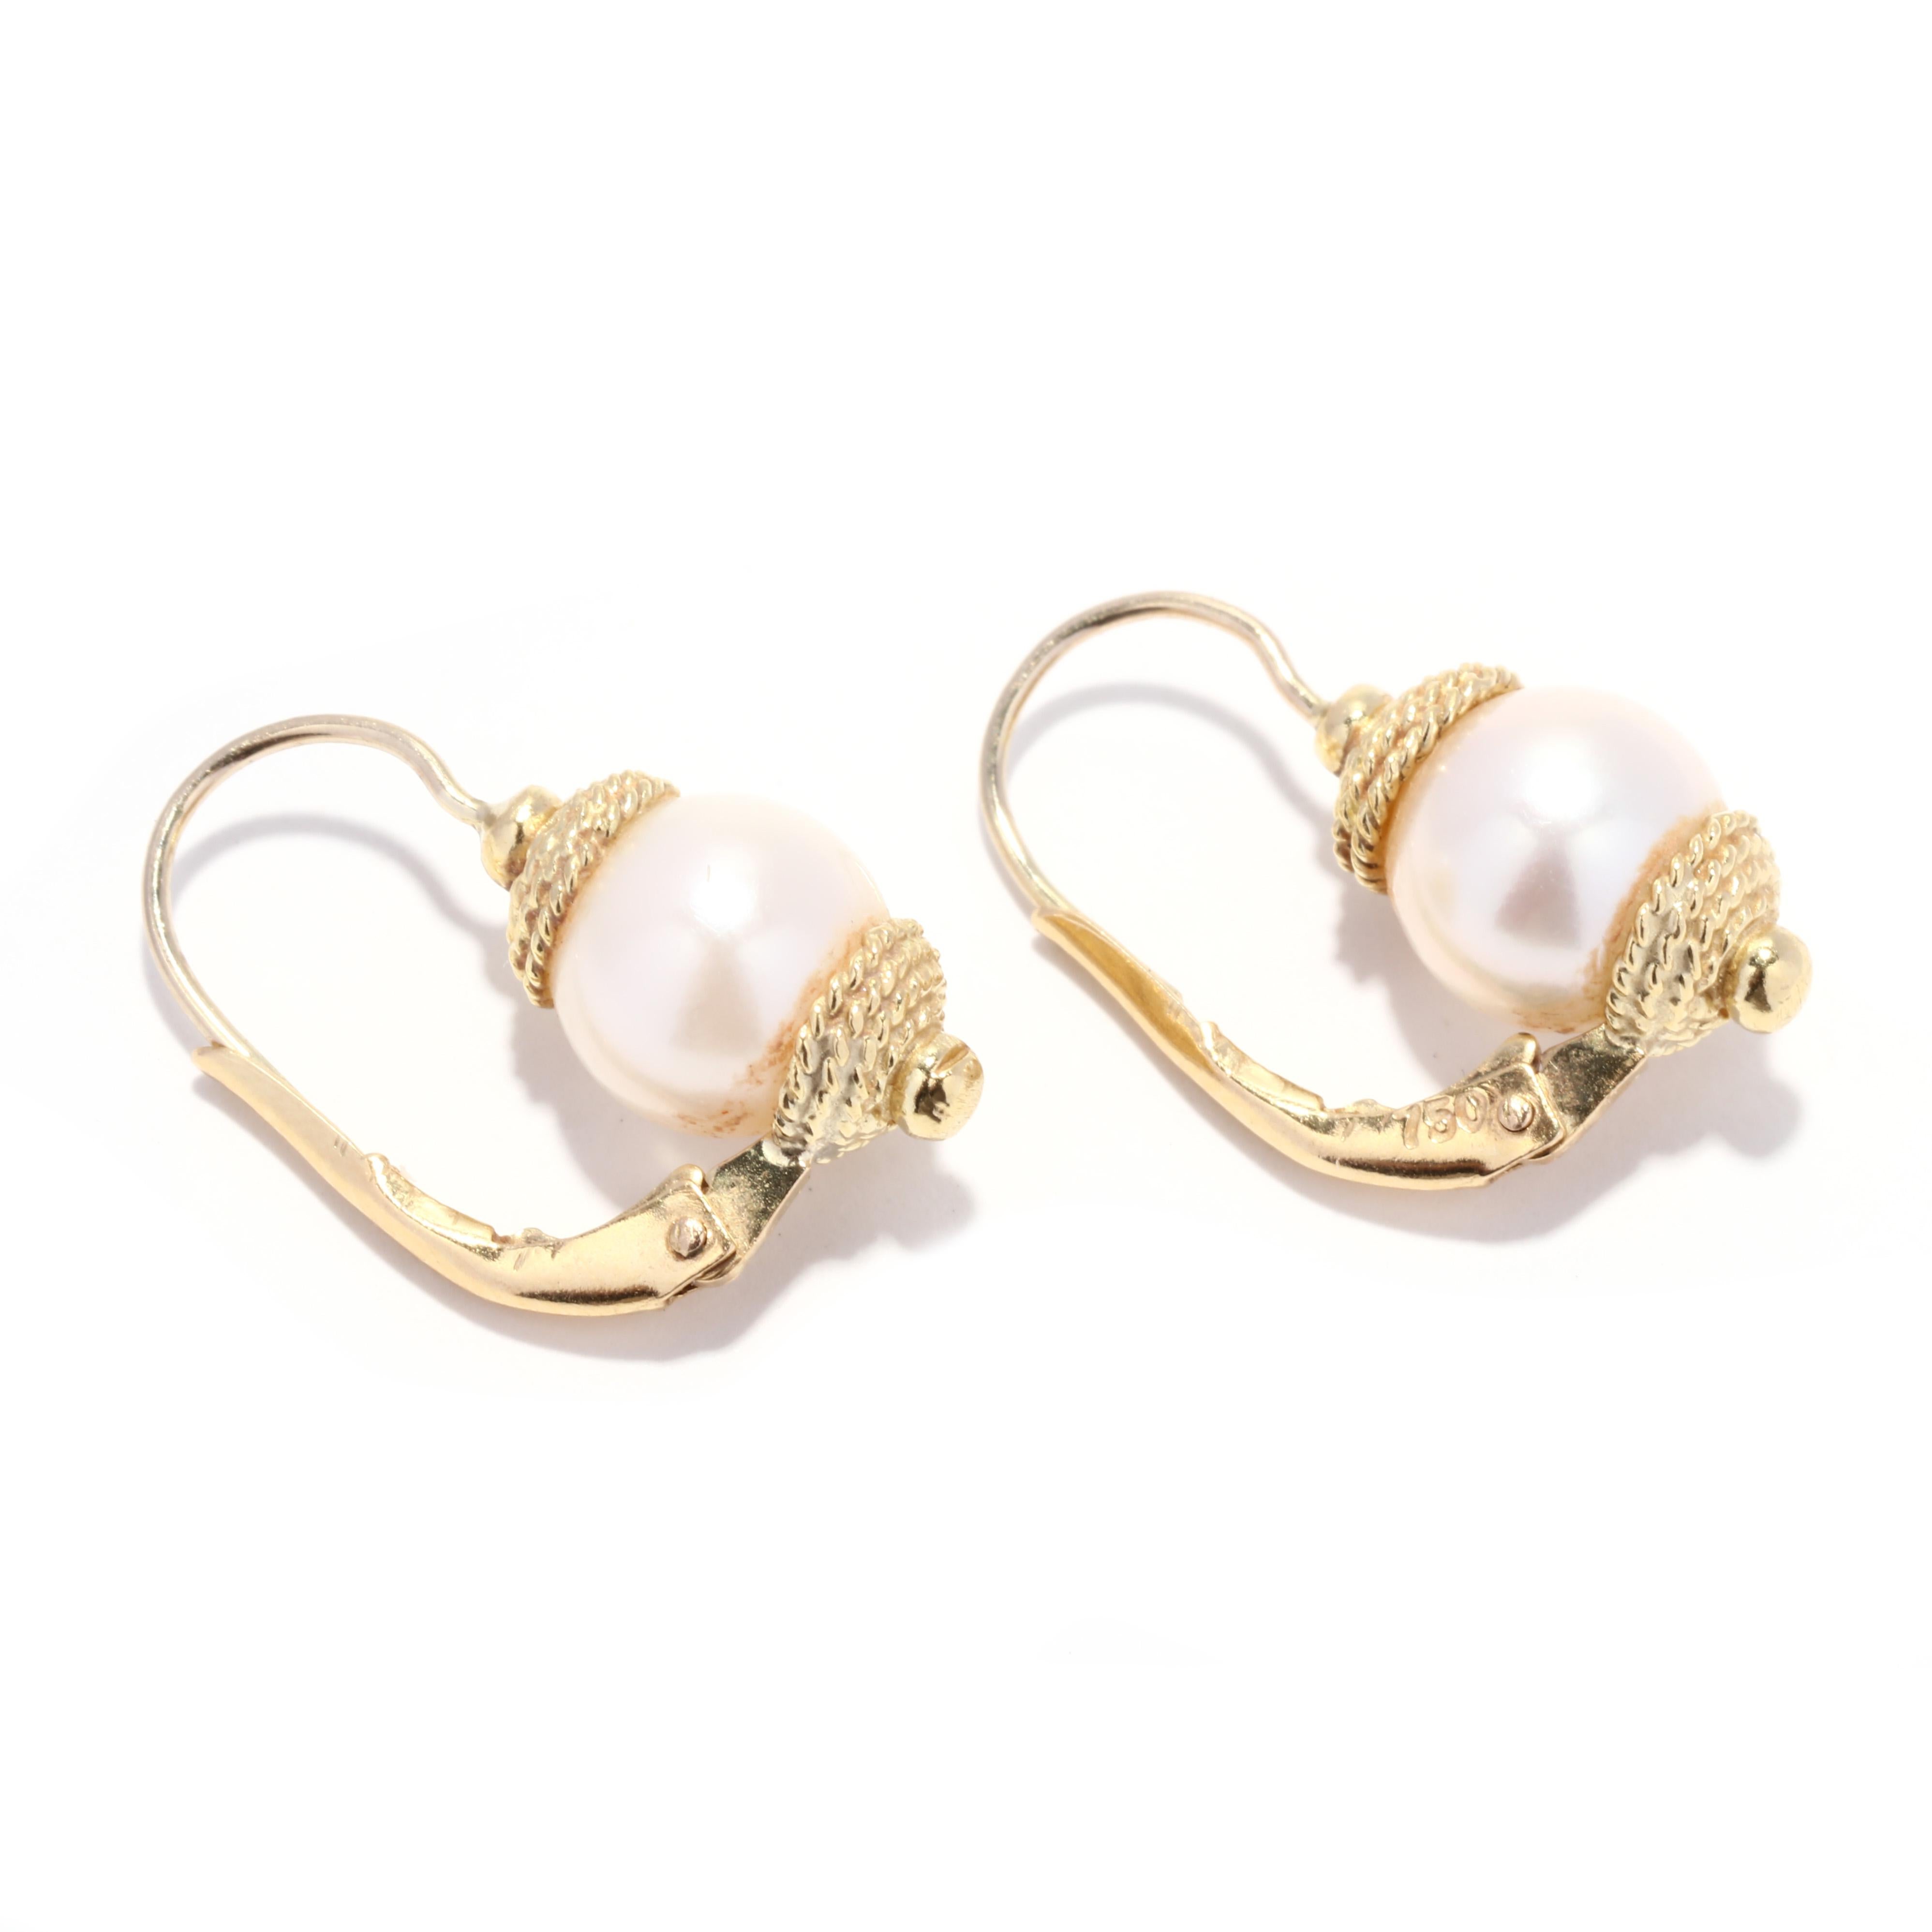 A pair of vintage 18-karat yellow gold white pearl drop earrings. These classic earrings feature 8mm white pearls with rose overtones with twist rope motif end caps and pierced lever back closures.

Stones:
- pearls, 2 stones
- round bead
- 8